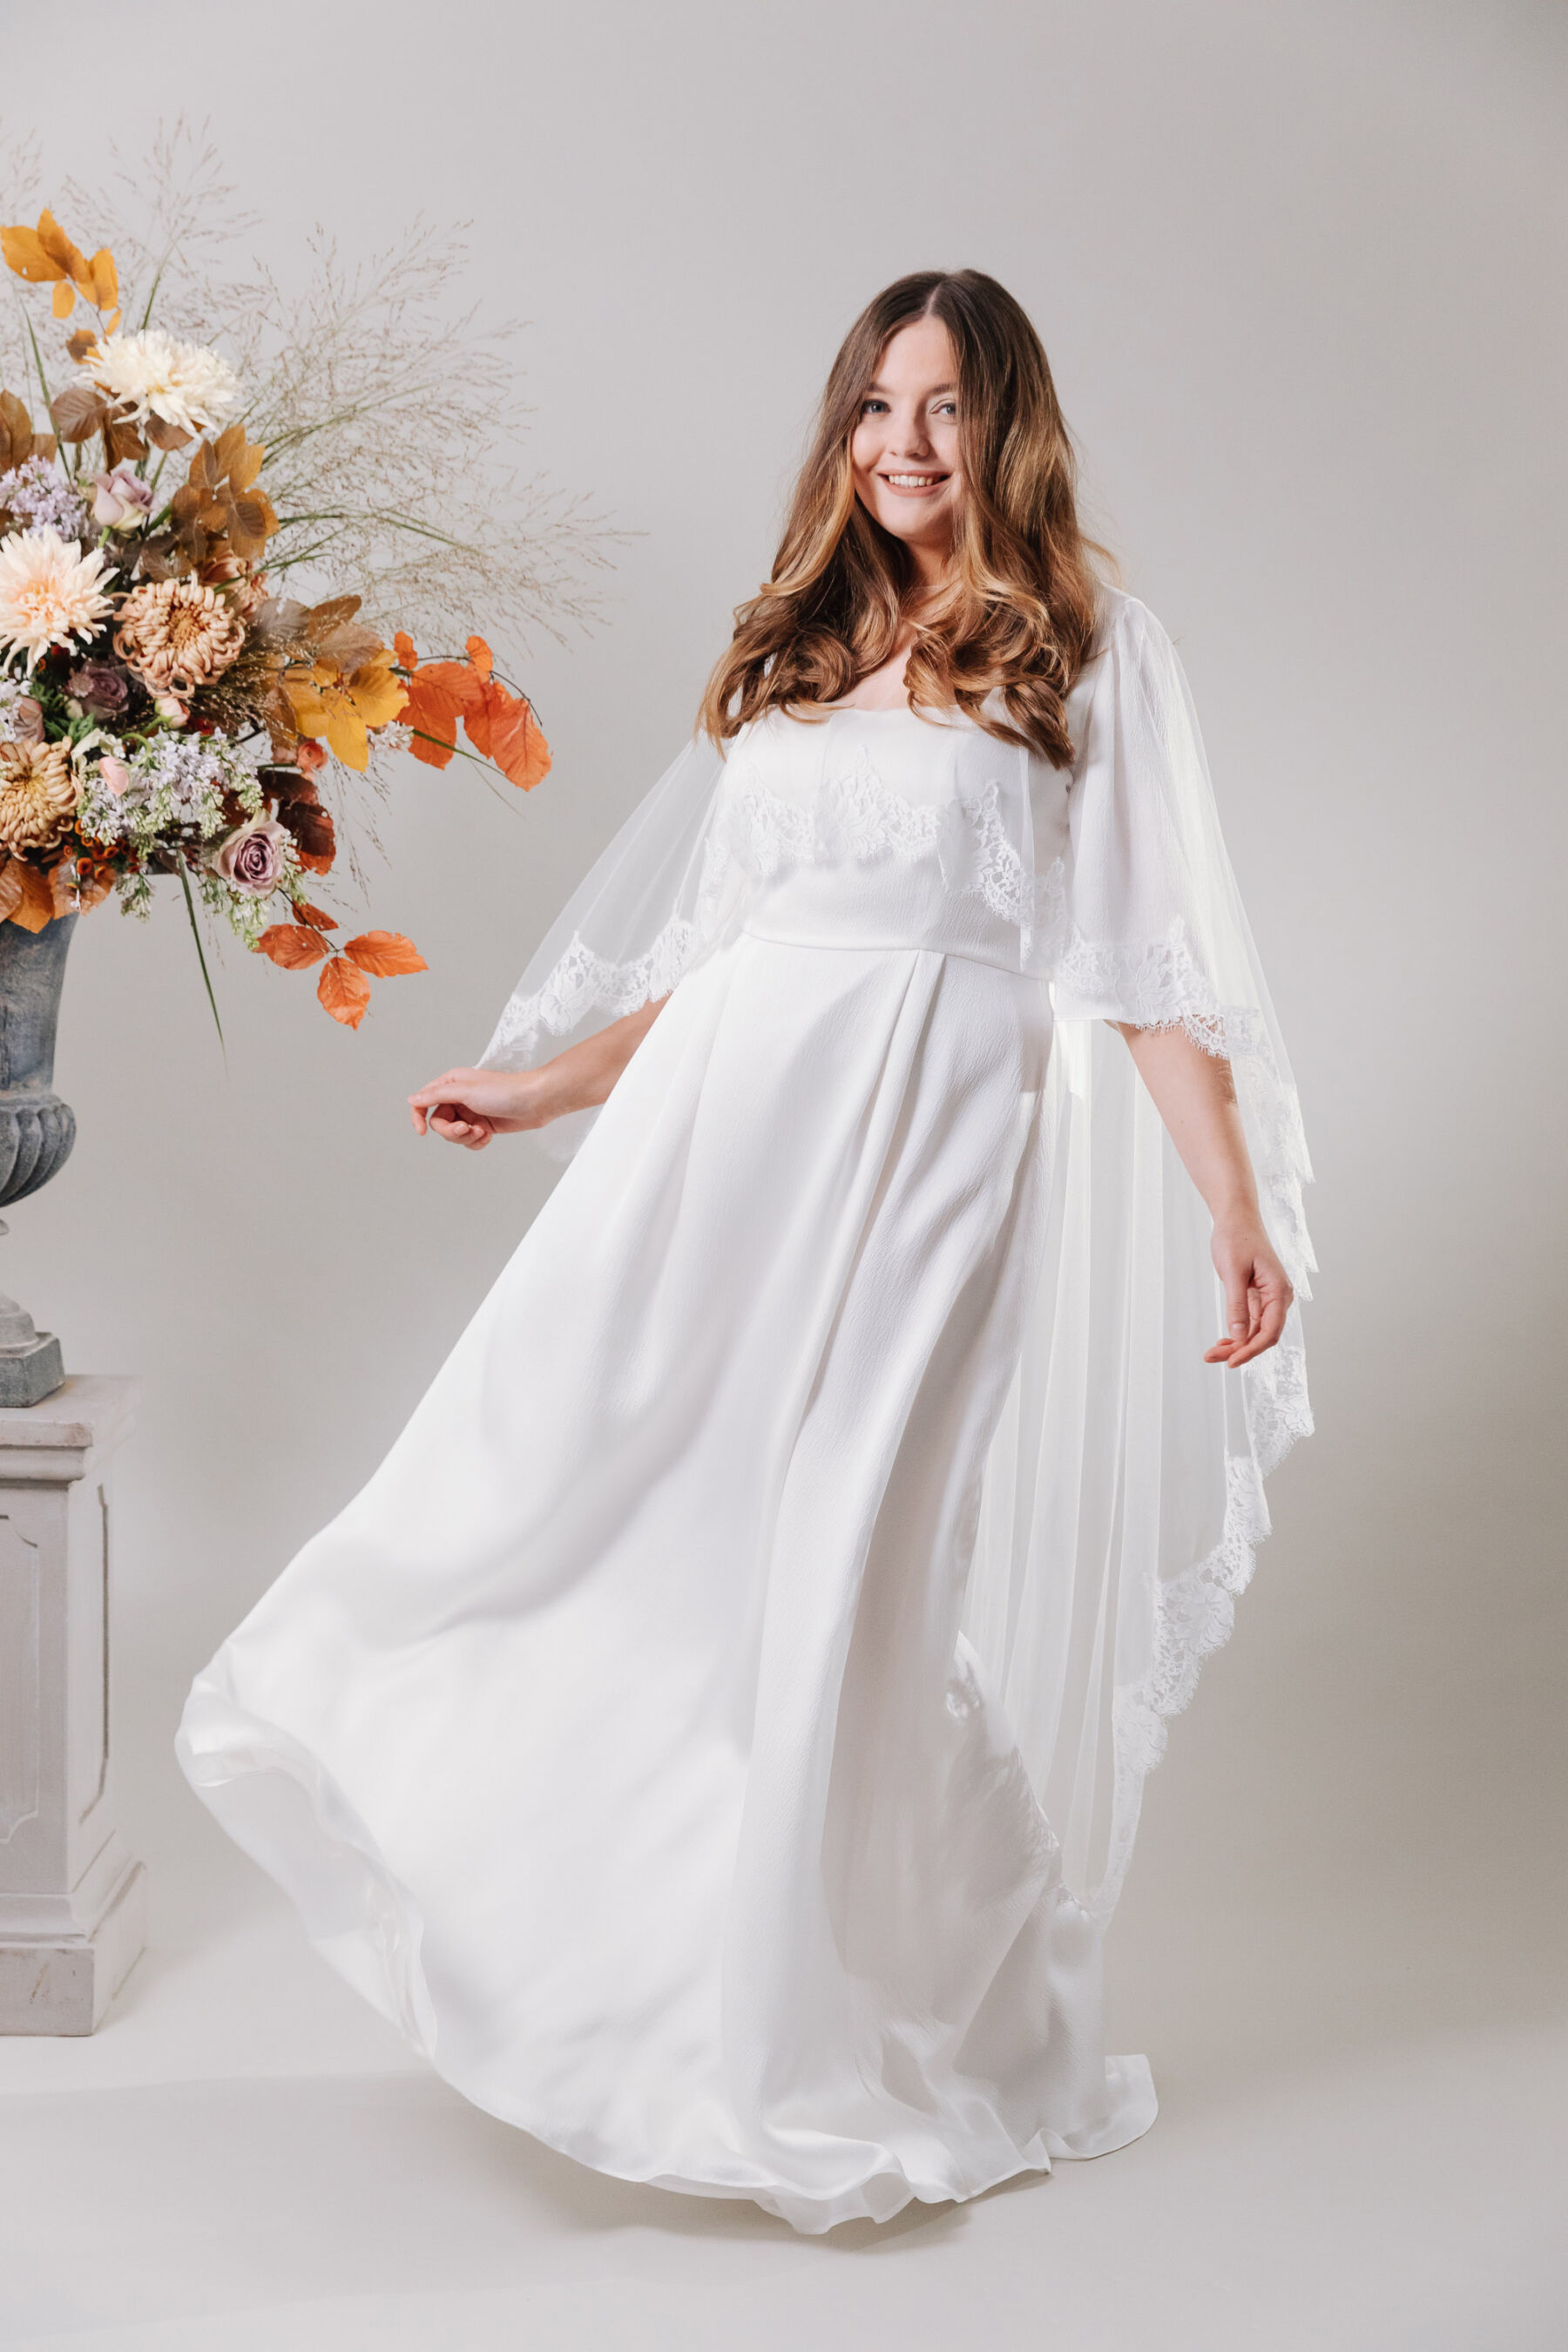 Plus size wedding dress by Kate Beaumont